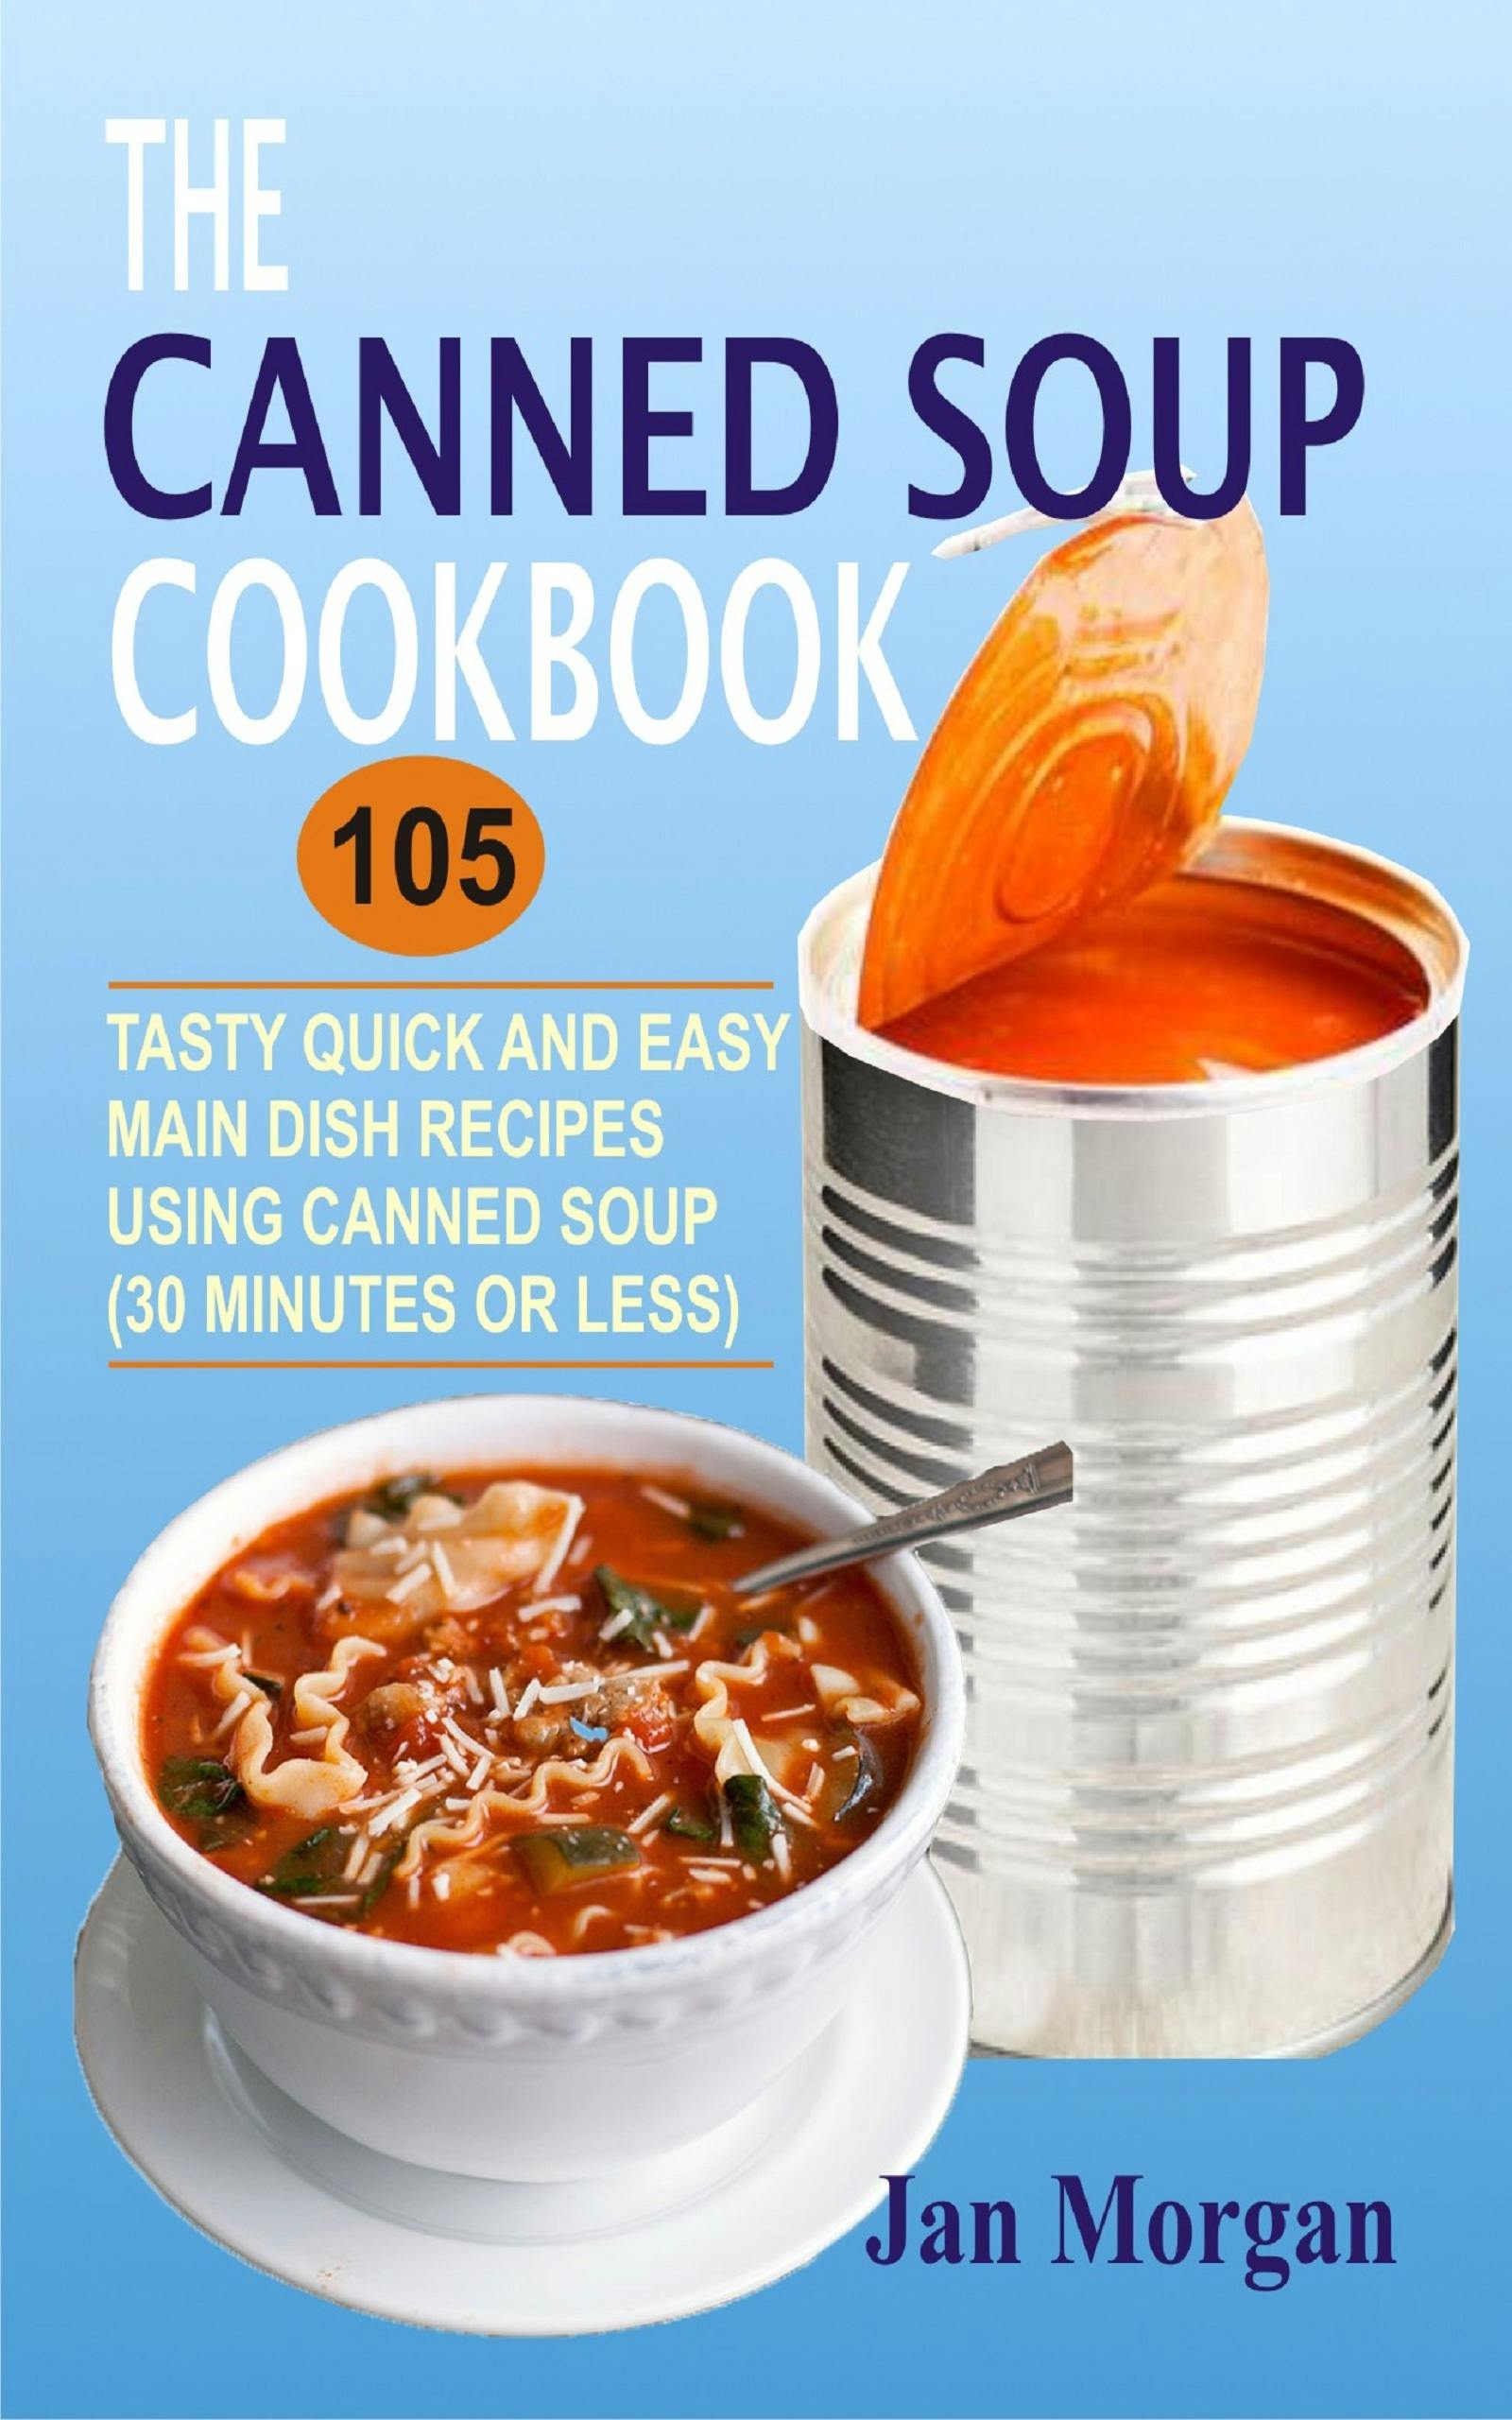 The Canned Soup Cookbook - undefined